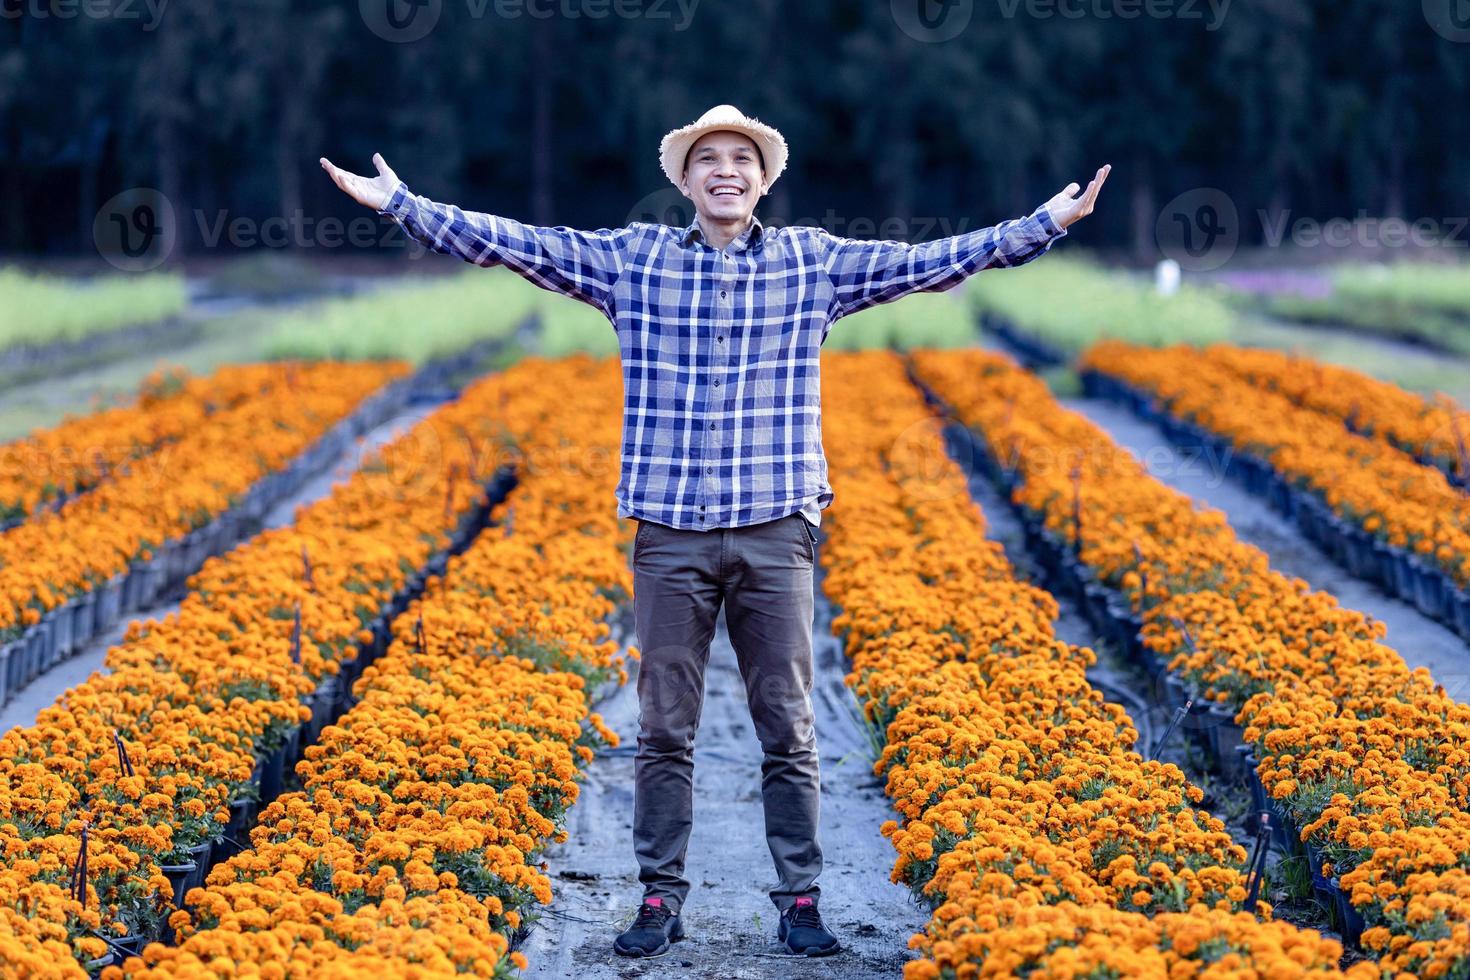 Asian gardener is welcoming people into his cut flower farm full of orange marigold for medicinal and garnish in fine dining restaurant business photo